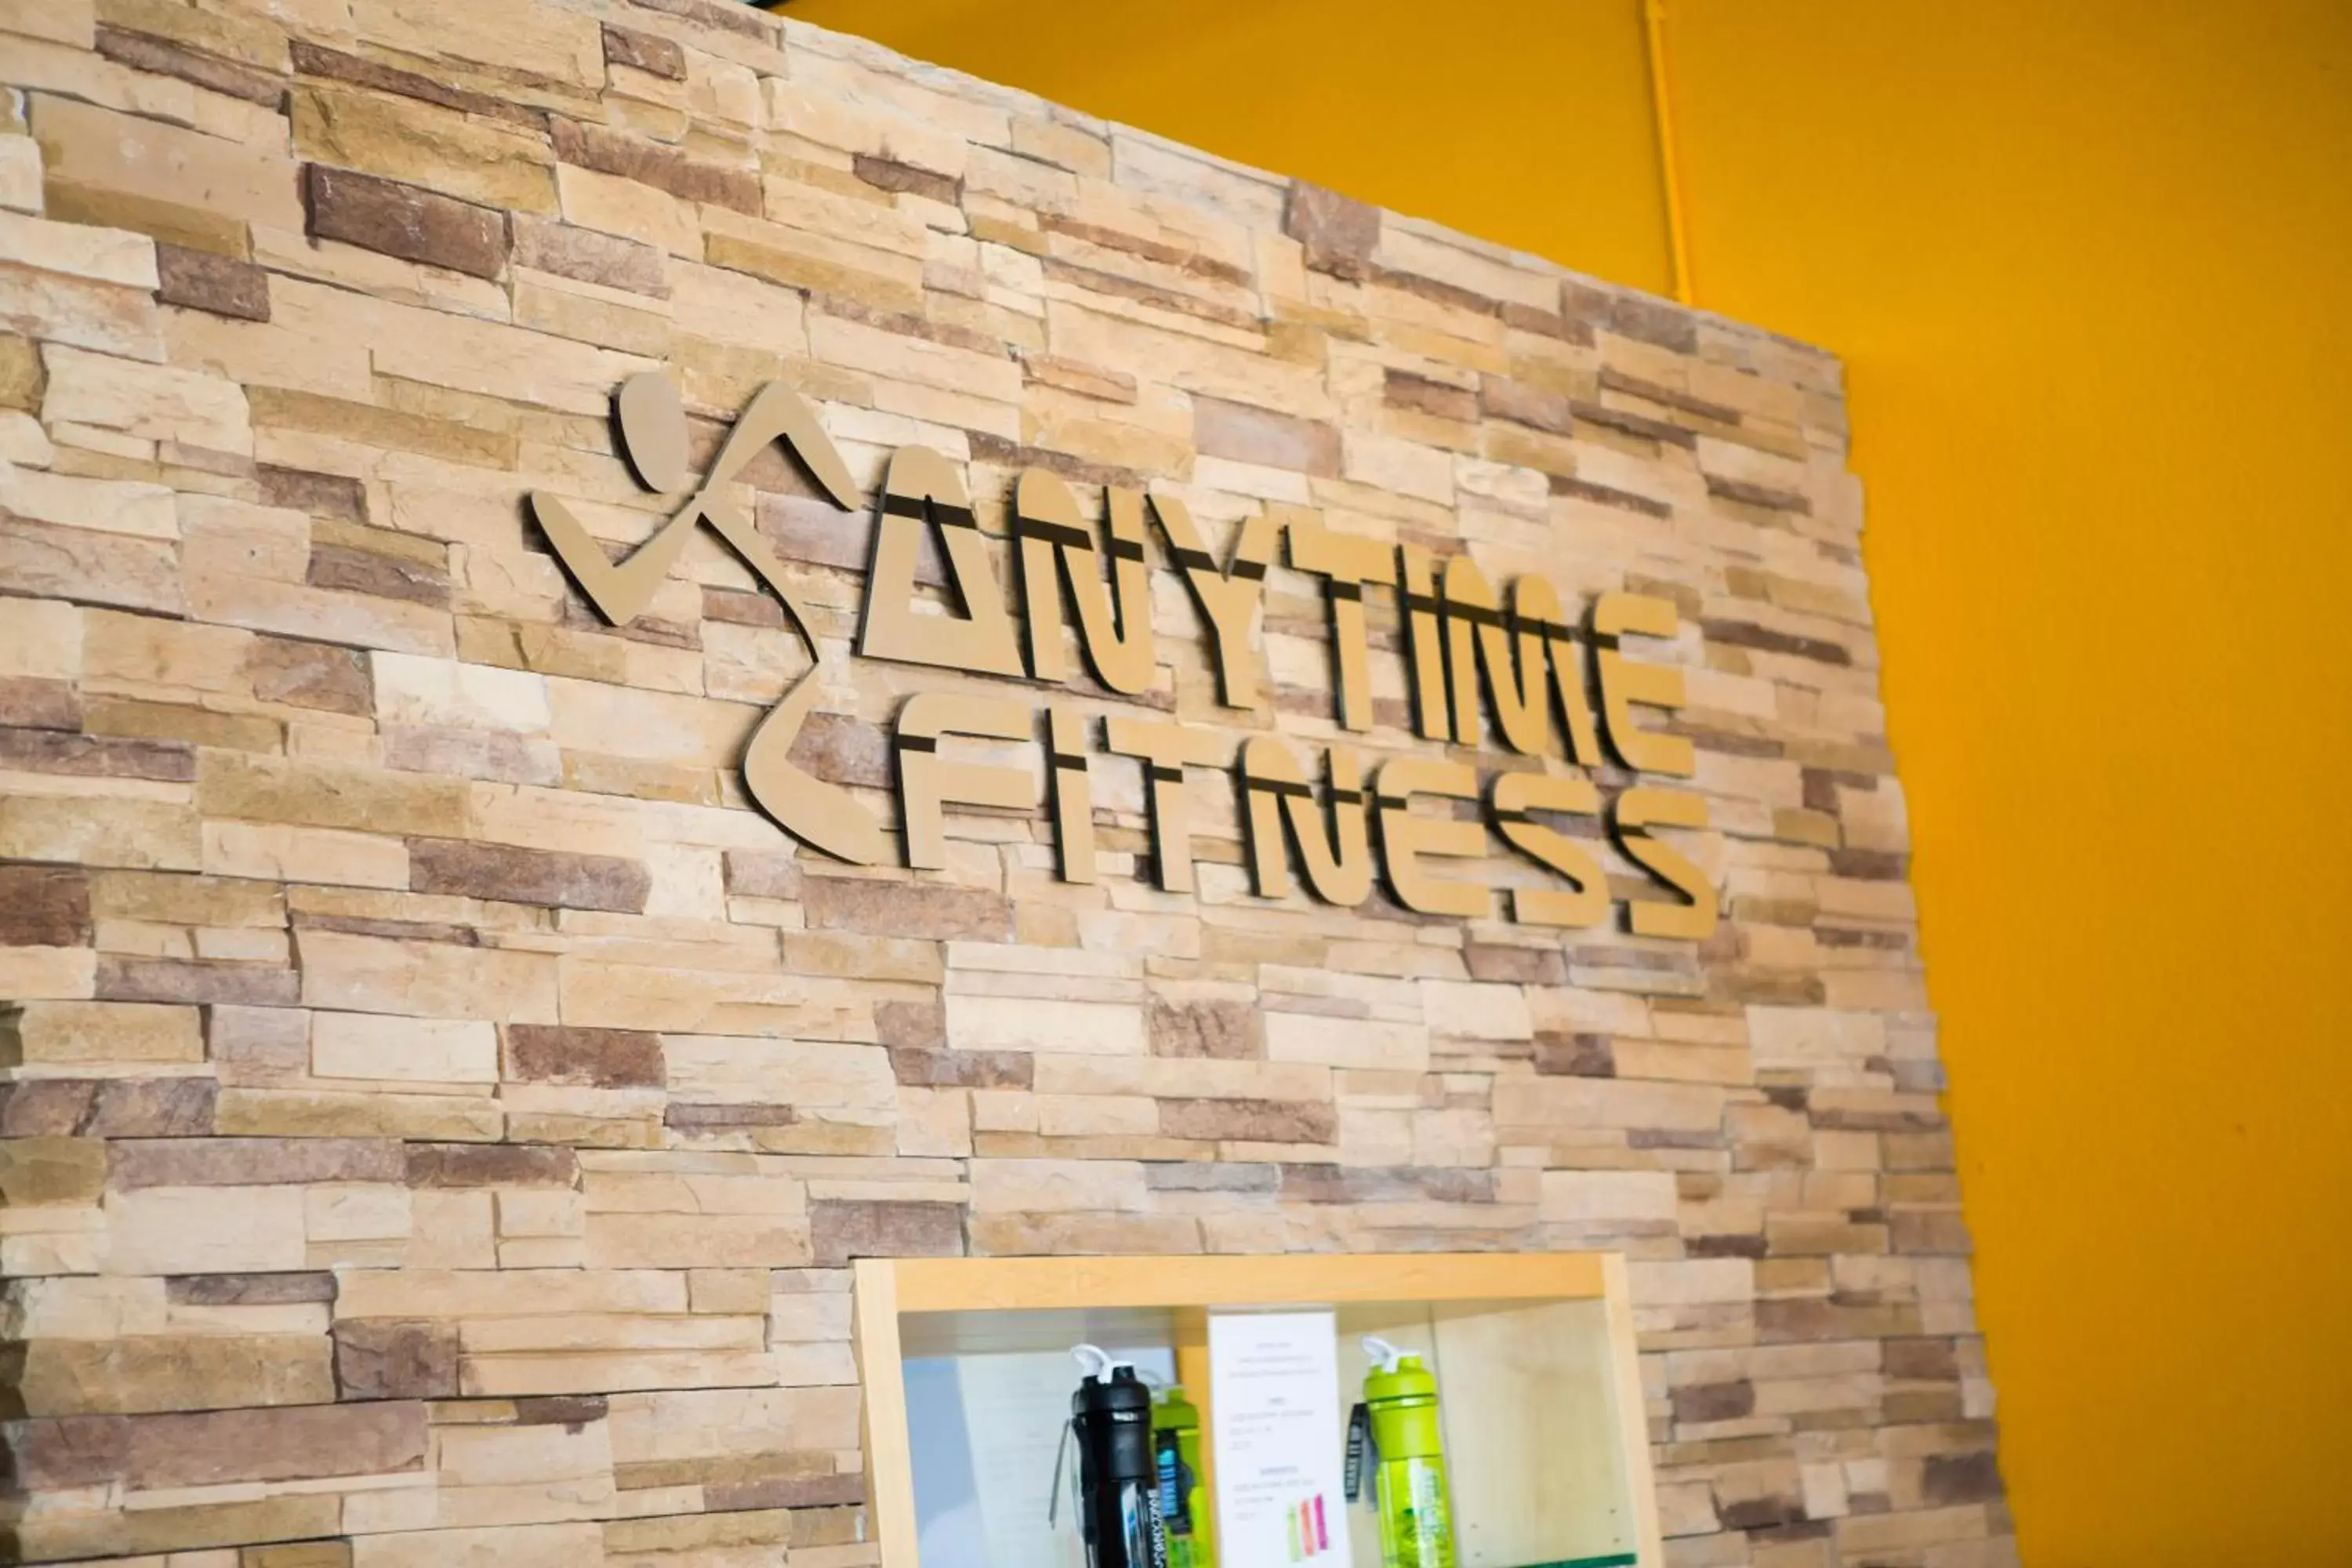 Fitness centre/facilities, Property Logo/Sign in Super 8 by Wyndham St. James